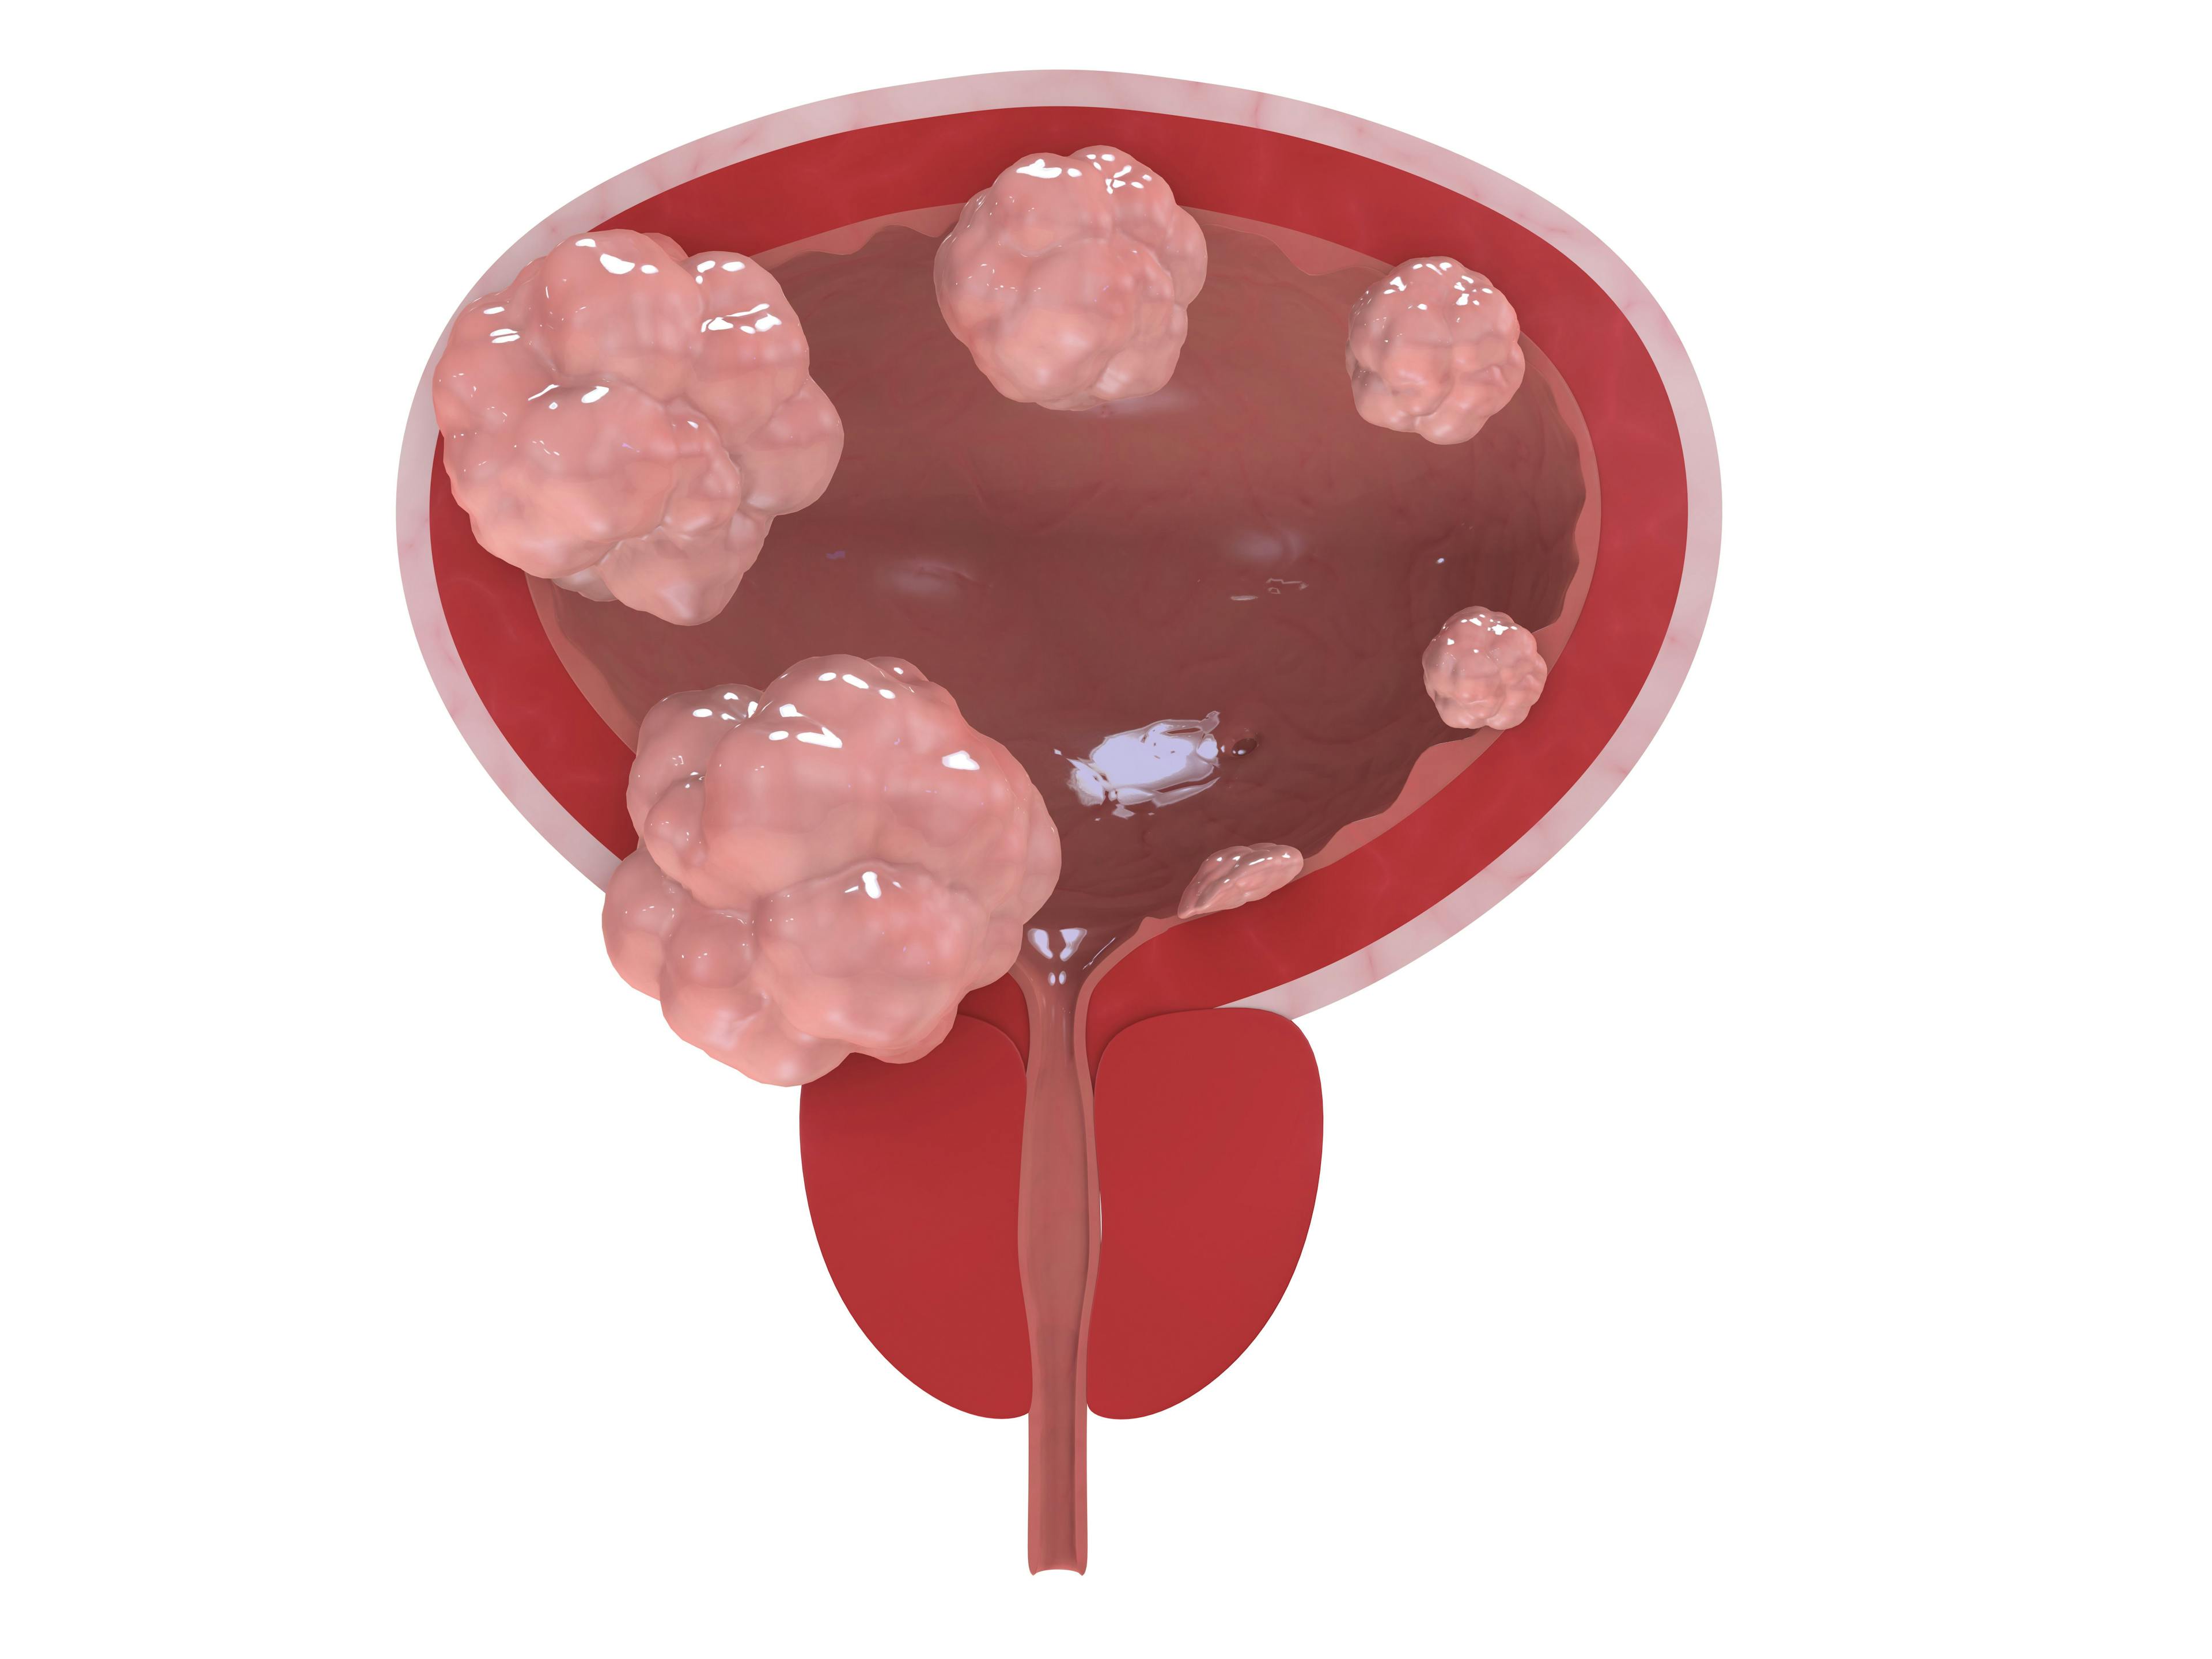 Investigators identify an association between circulating tumor DNA in the blood plasma detected via the RaDaR assay and response to treatment with neoadjuvant immunotherapy for muscle-invasive bladder cancer.